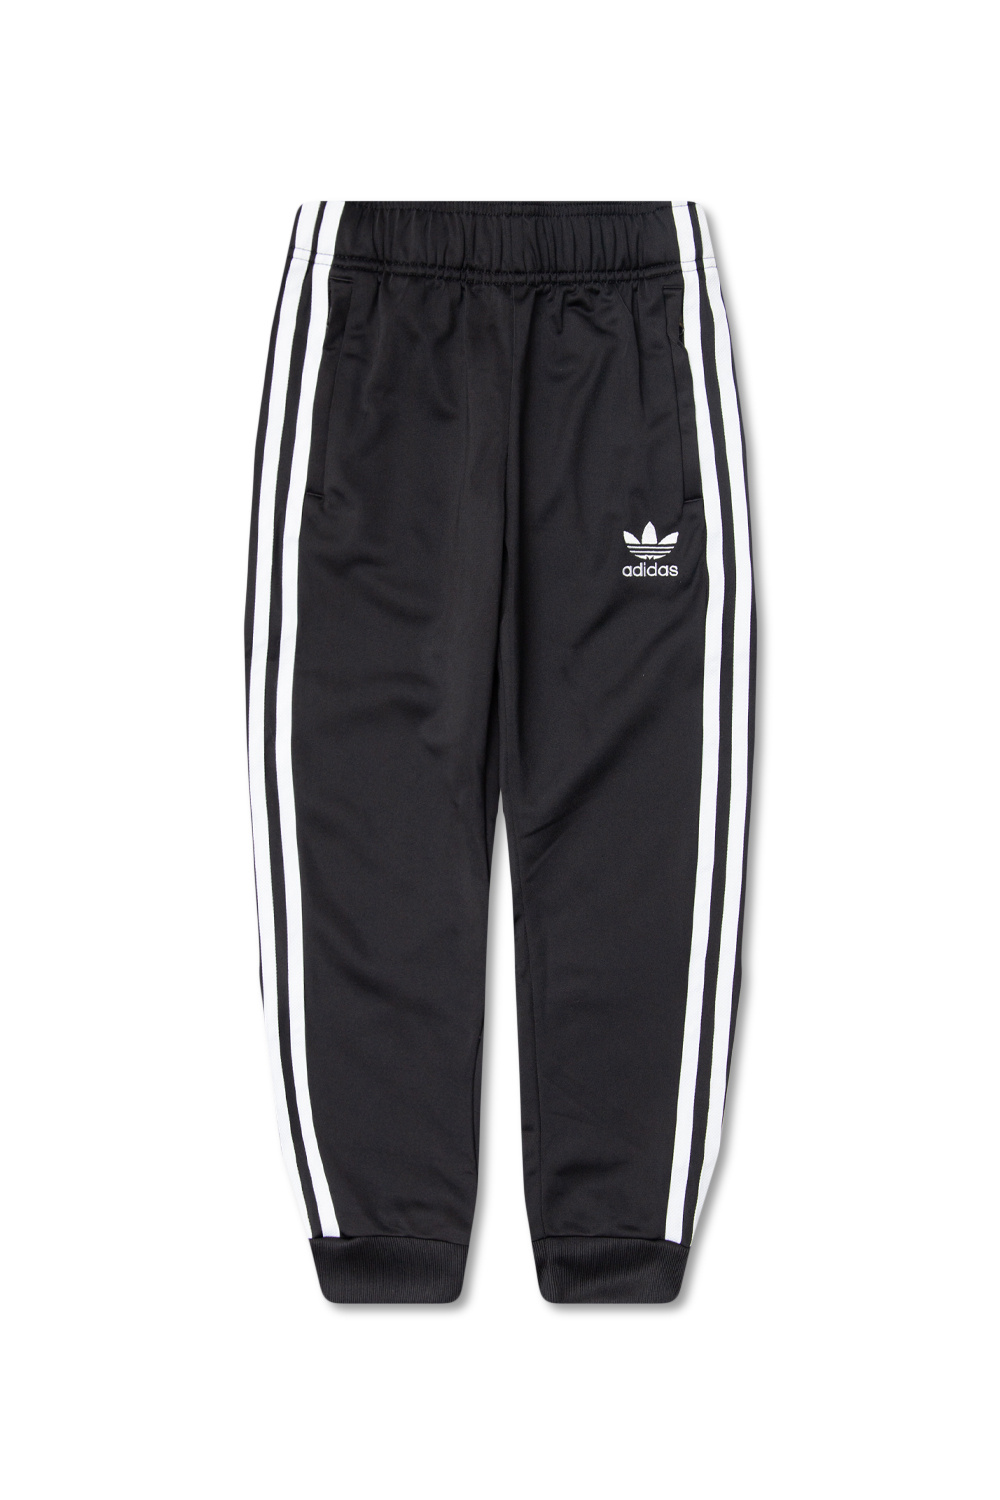 adidas kaval Kids Trousers with logo